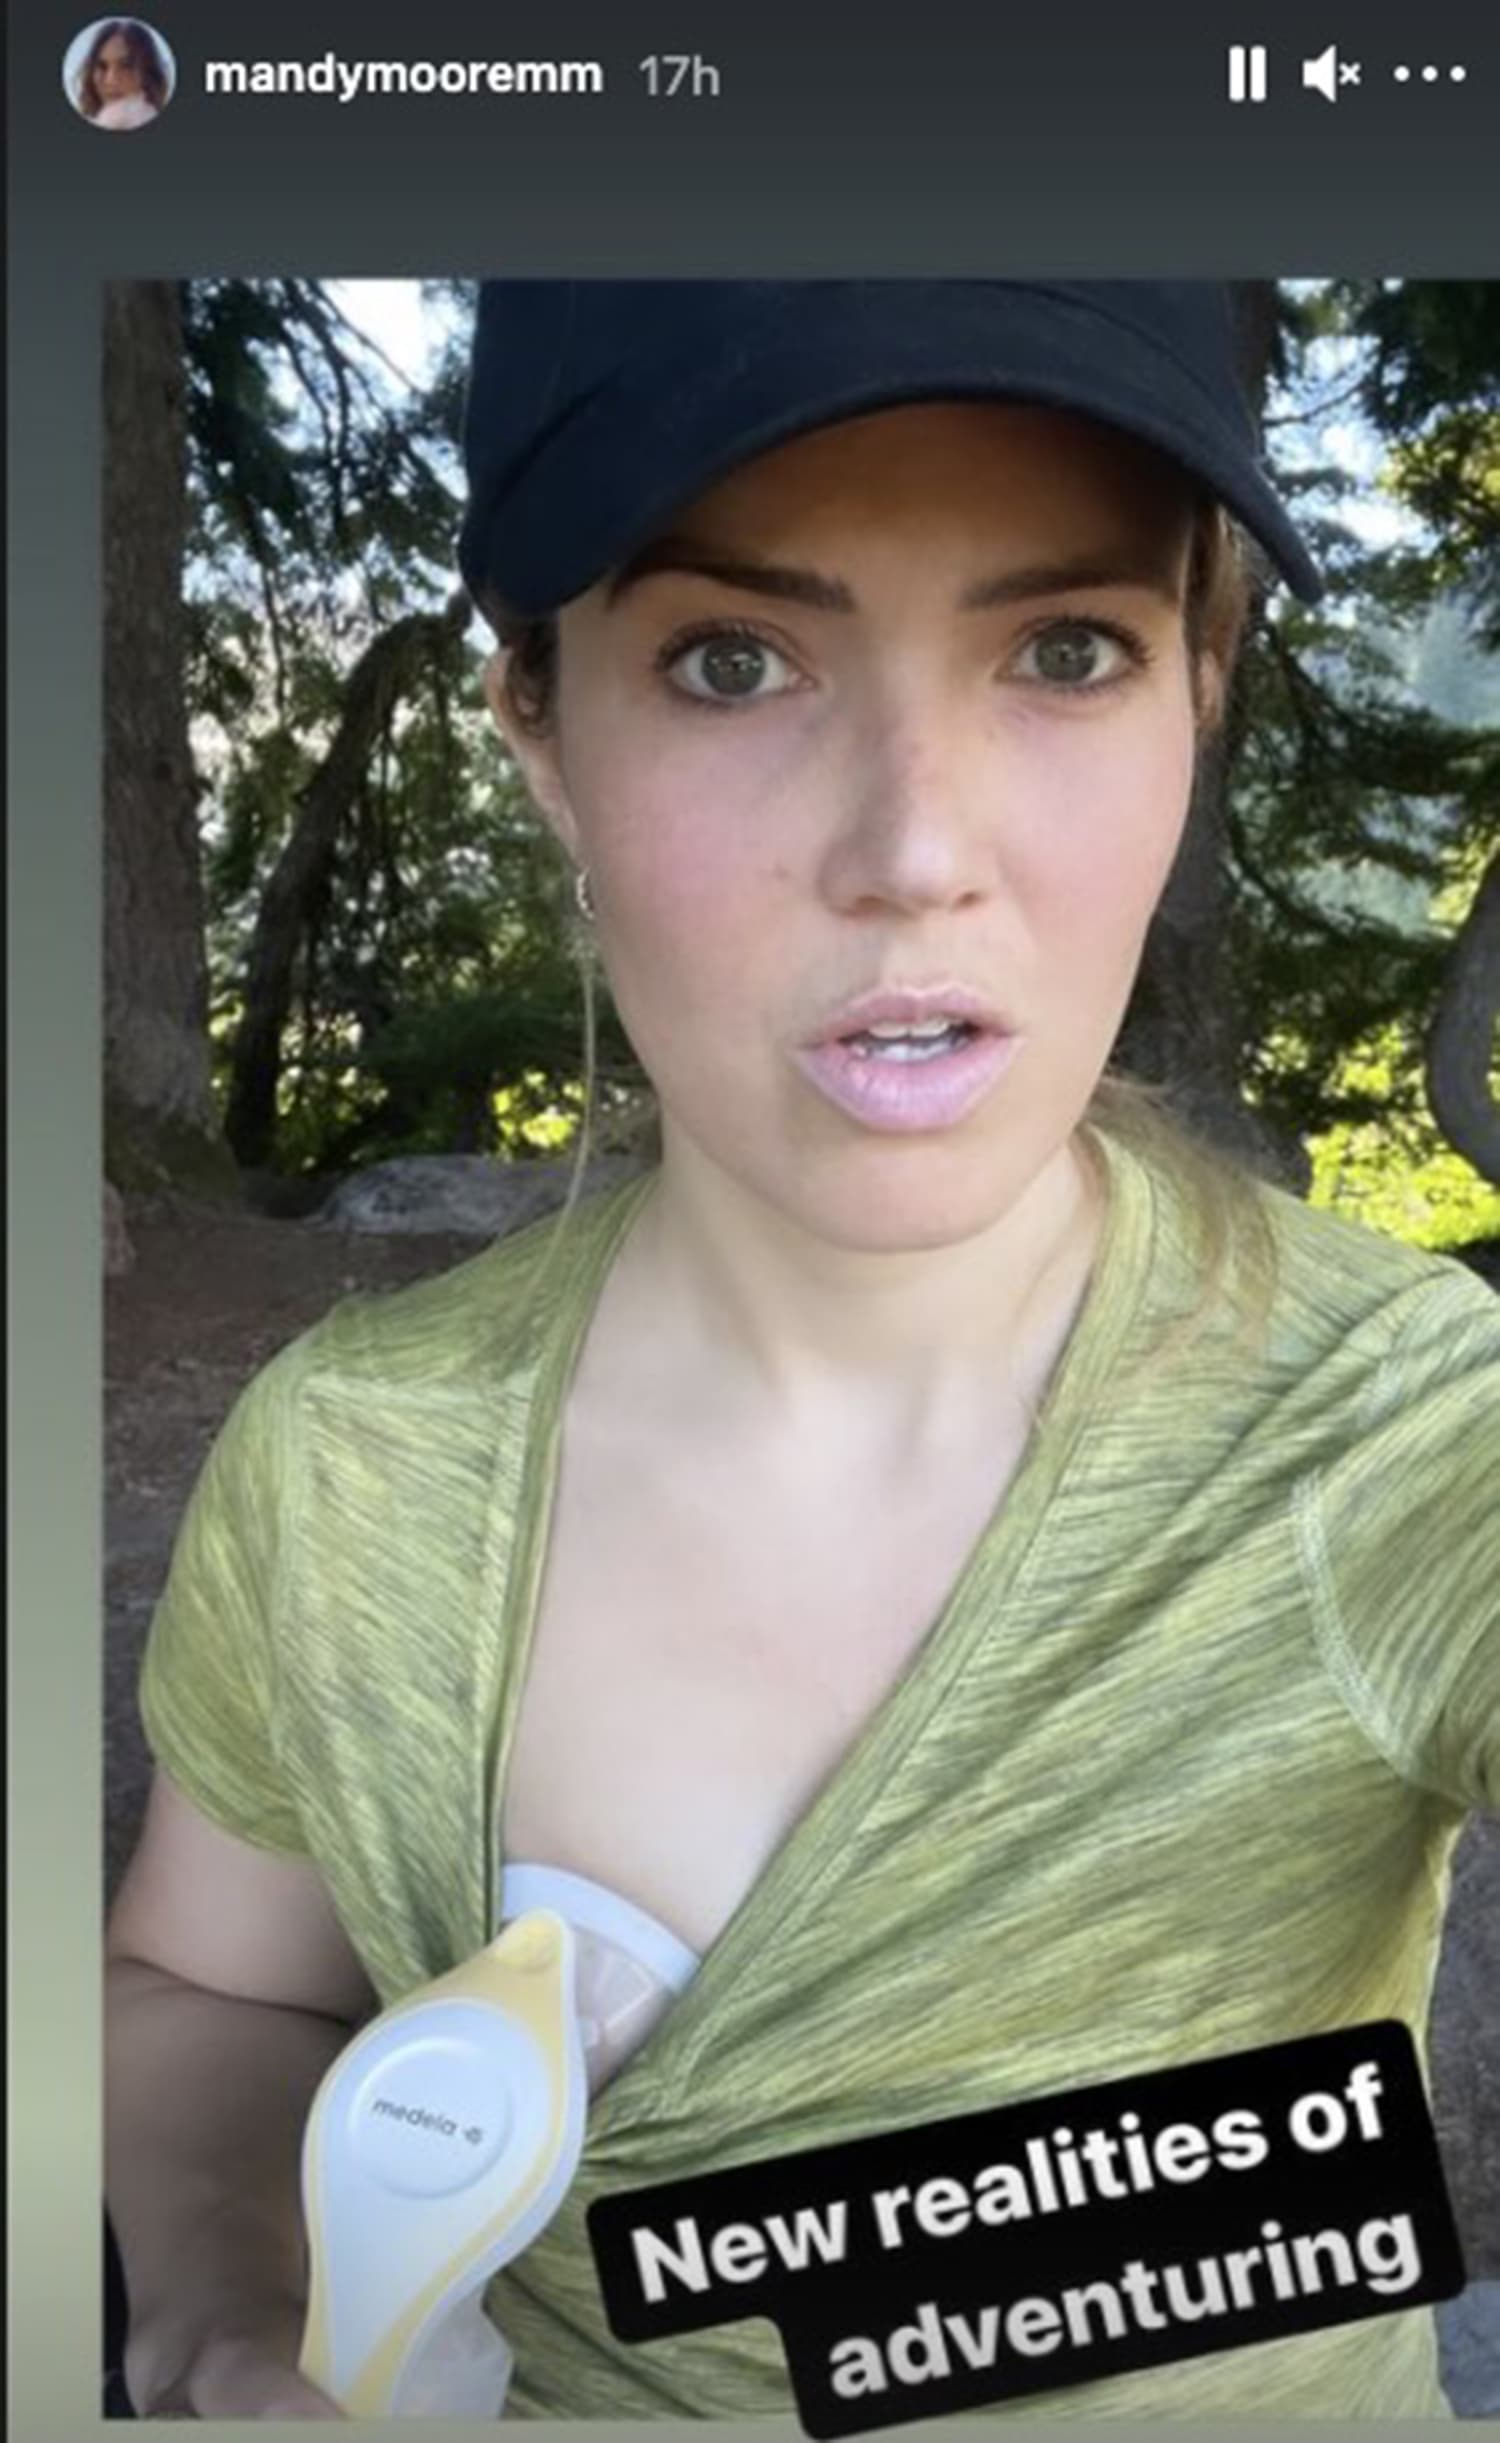 Mandy Moore Just Got a Tattoo in Honor of Her Mount Kilimanjaro Climb   Glamour